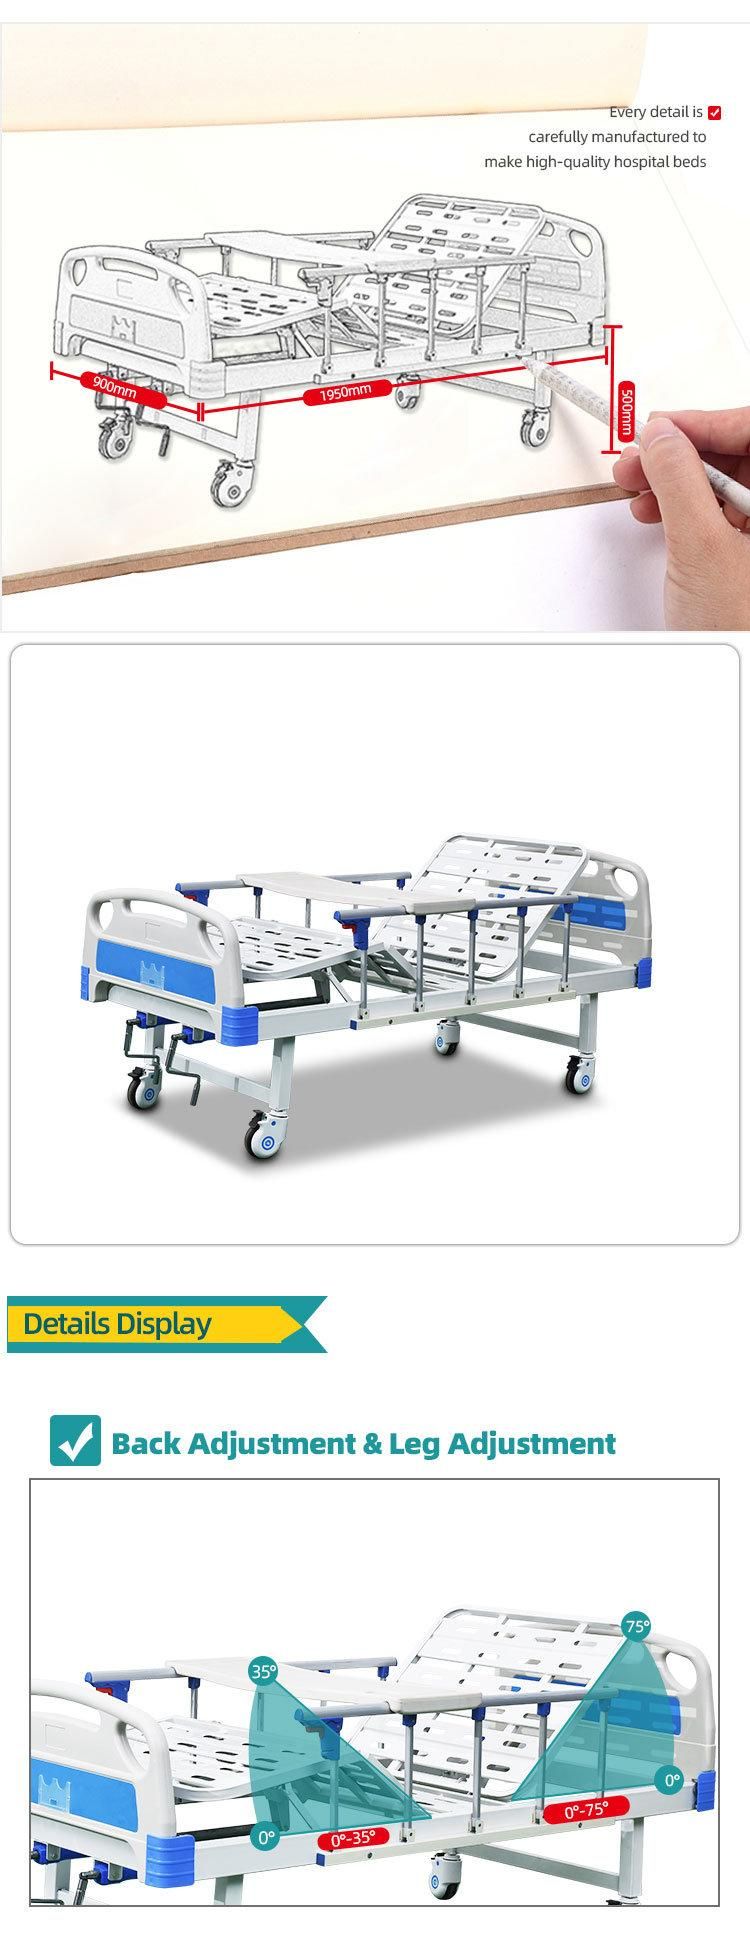 Hospital Bed Manufacturer Supply Two Cranks Manual Medical Bed with Mattress